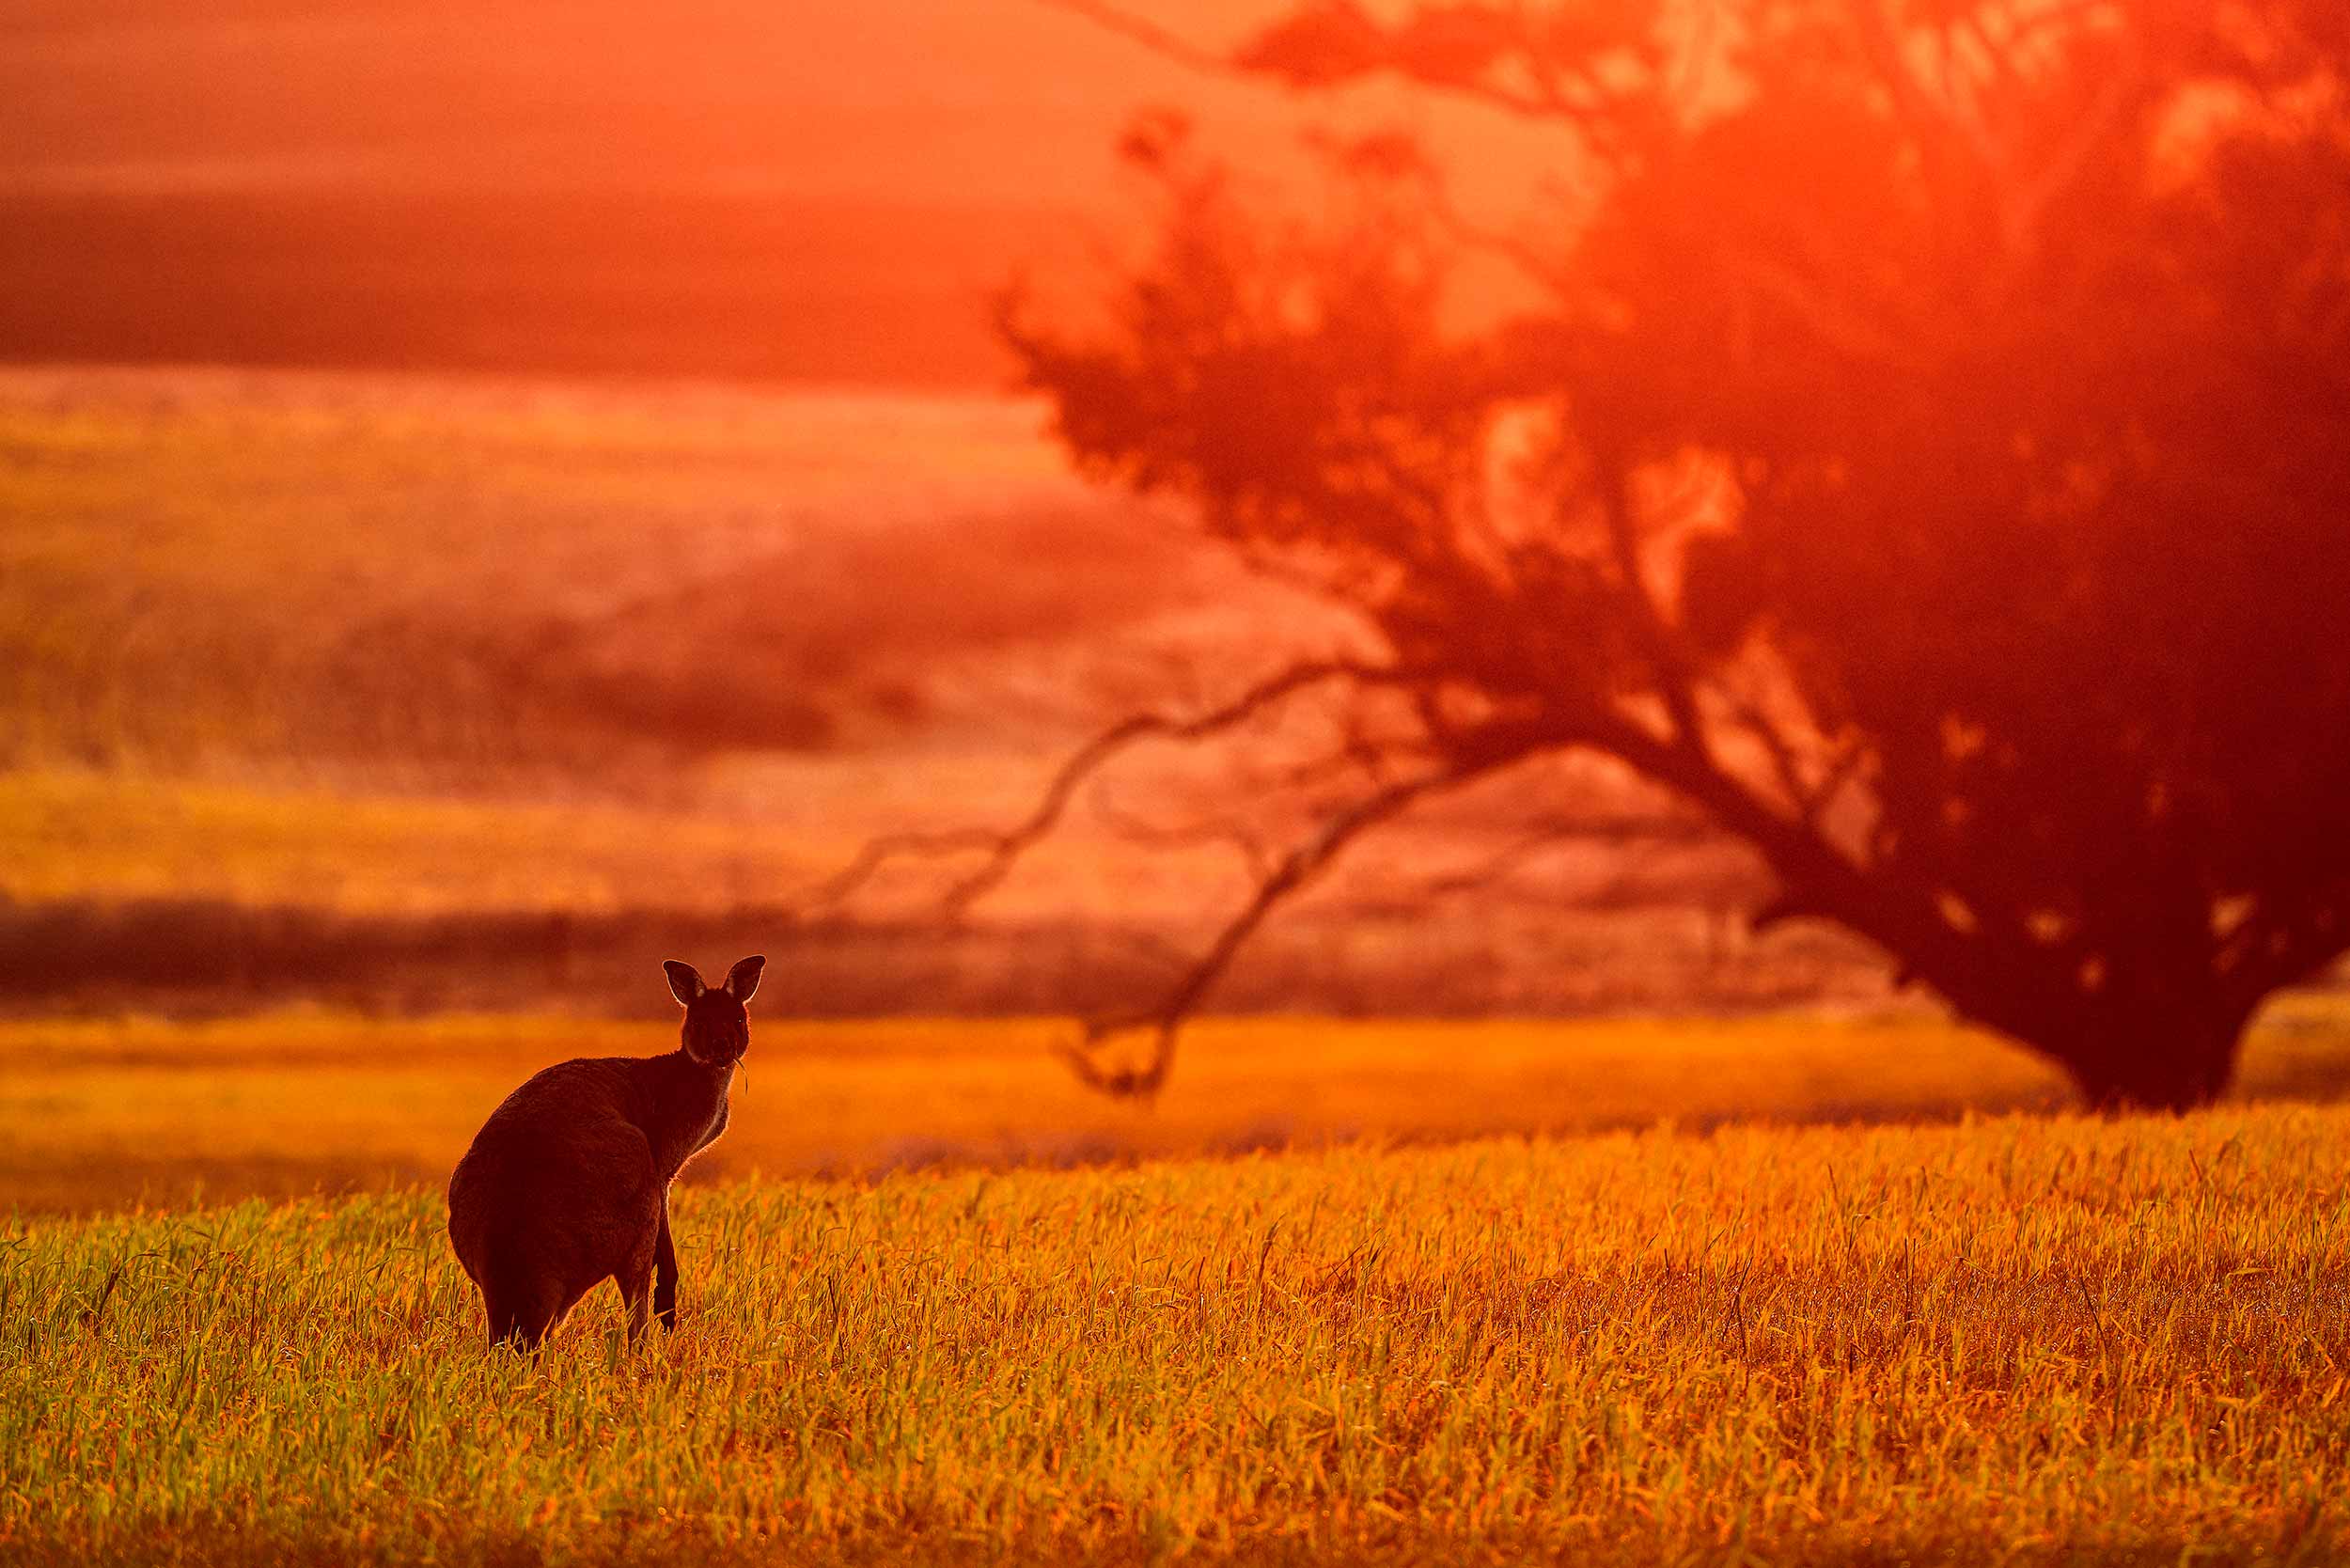 A lone Kangaroo eating a blade of grass during a wonderful deep red sunset with a gum tree in the background